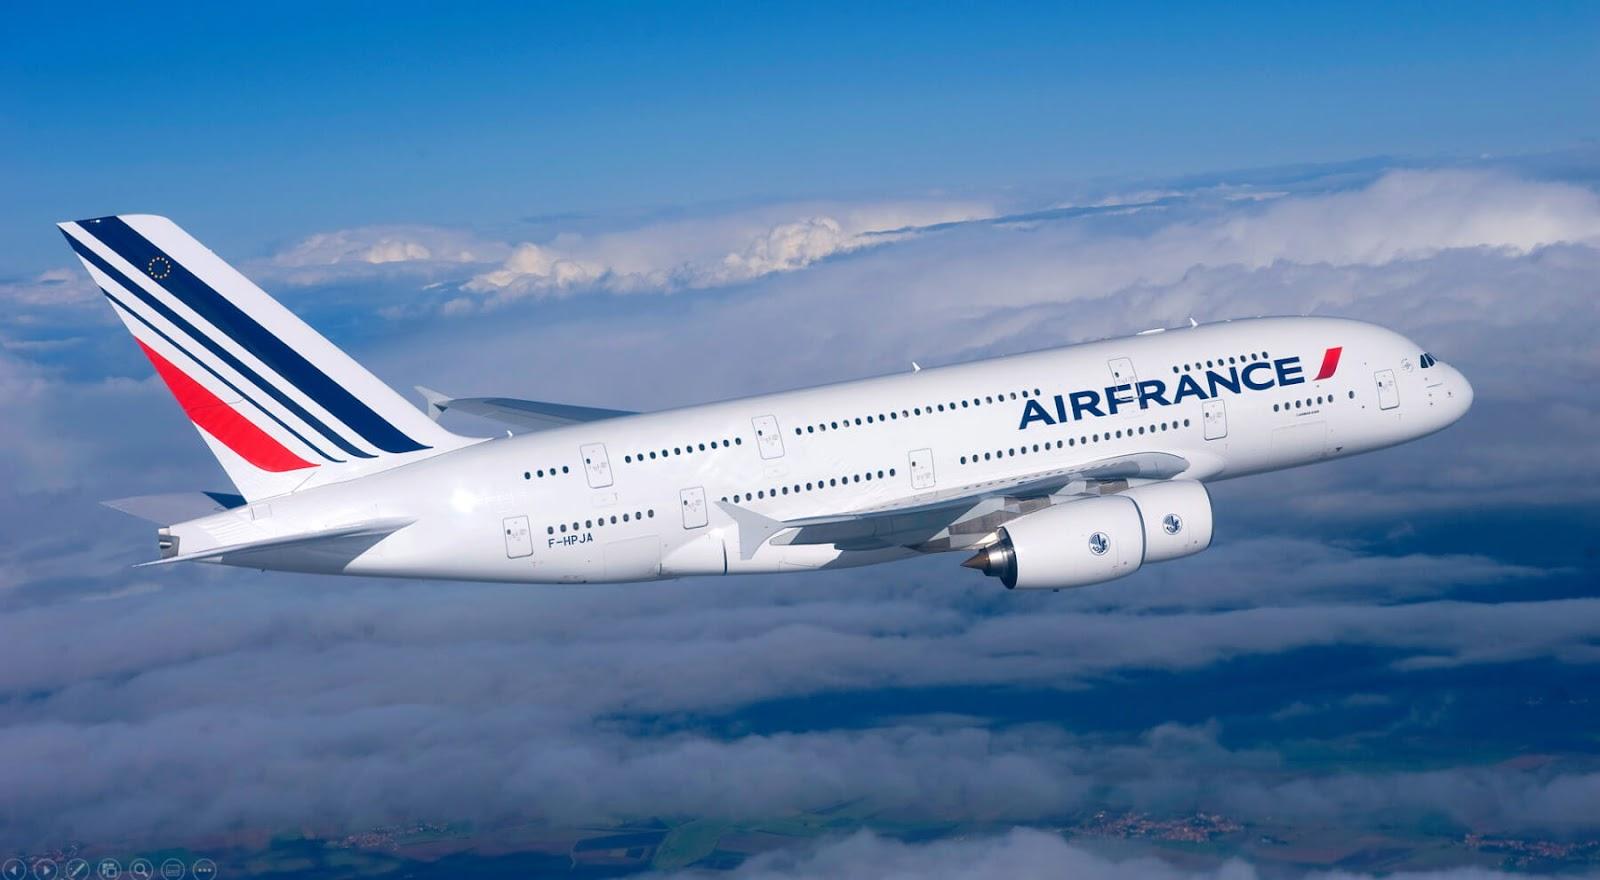 Air France aircraft is shown in the picture while flying over the clouds. the article is delta vs air france